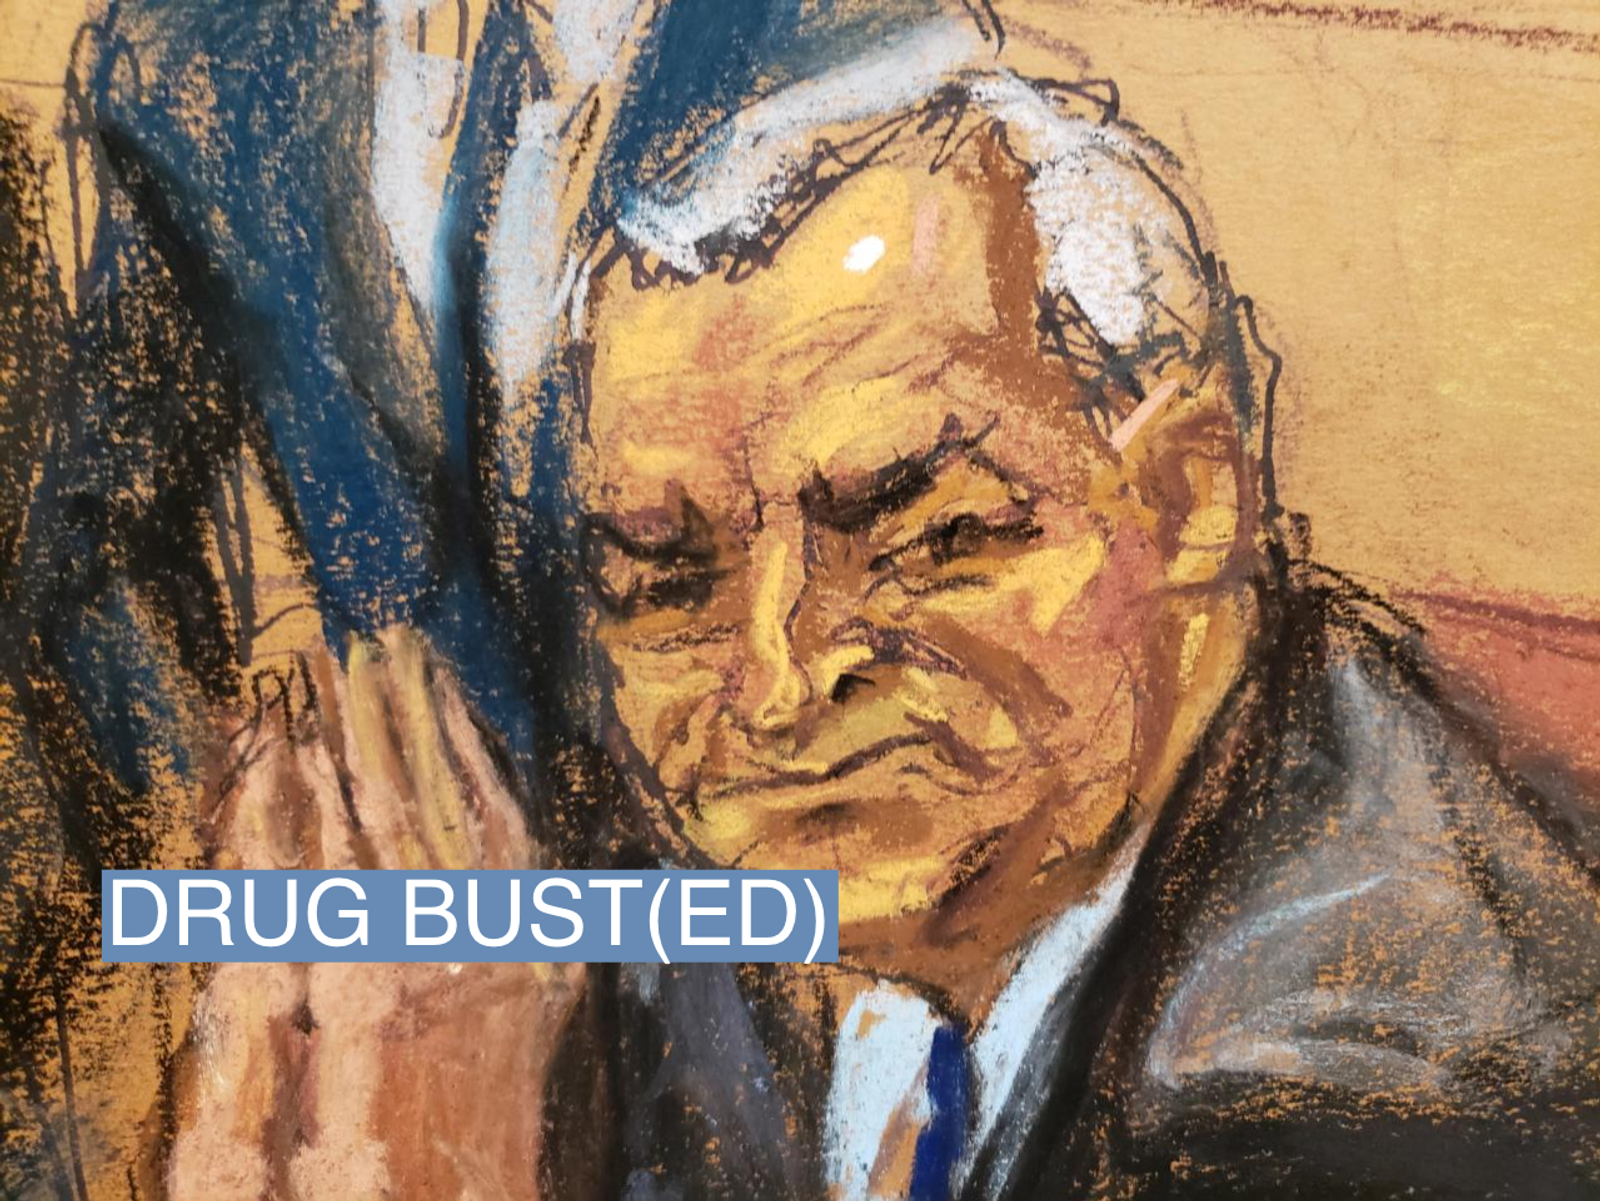 Mexico's former Public Security Minister Genaro Garcia Luna looks back at his wife seated in the audience during his trial in this courtroom sketch.